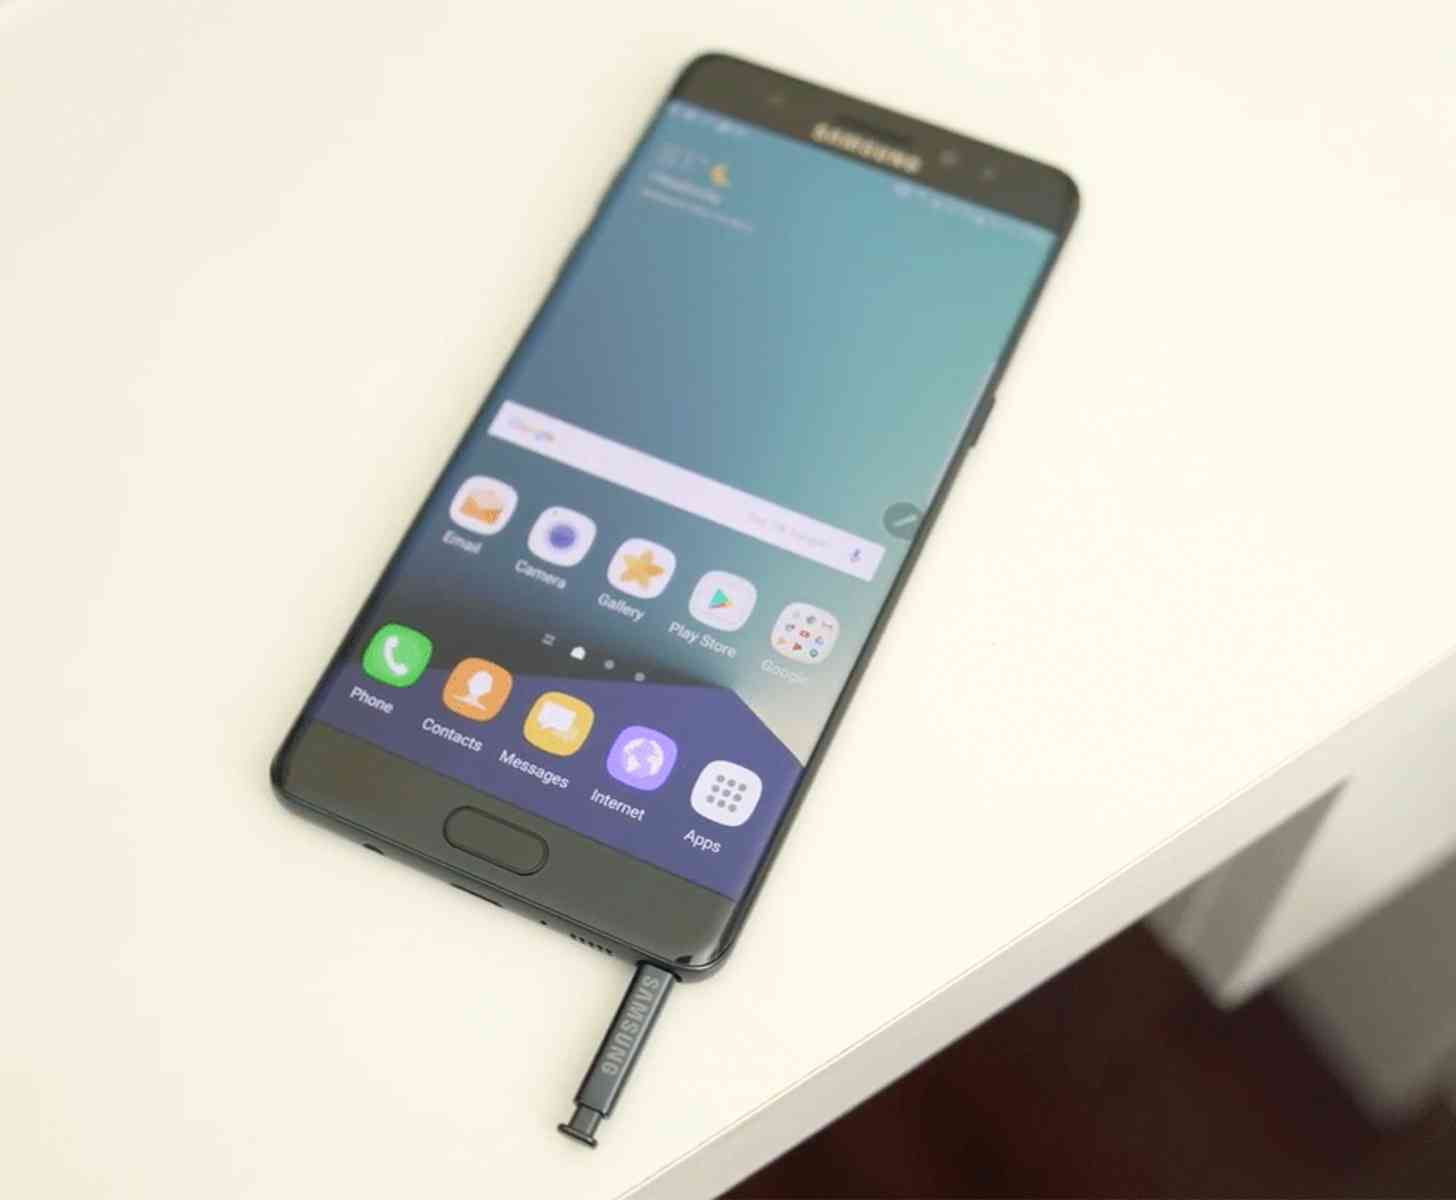 Samsung Galaxy Note 7 hands-on unboxing